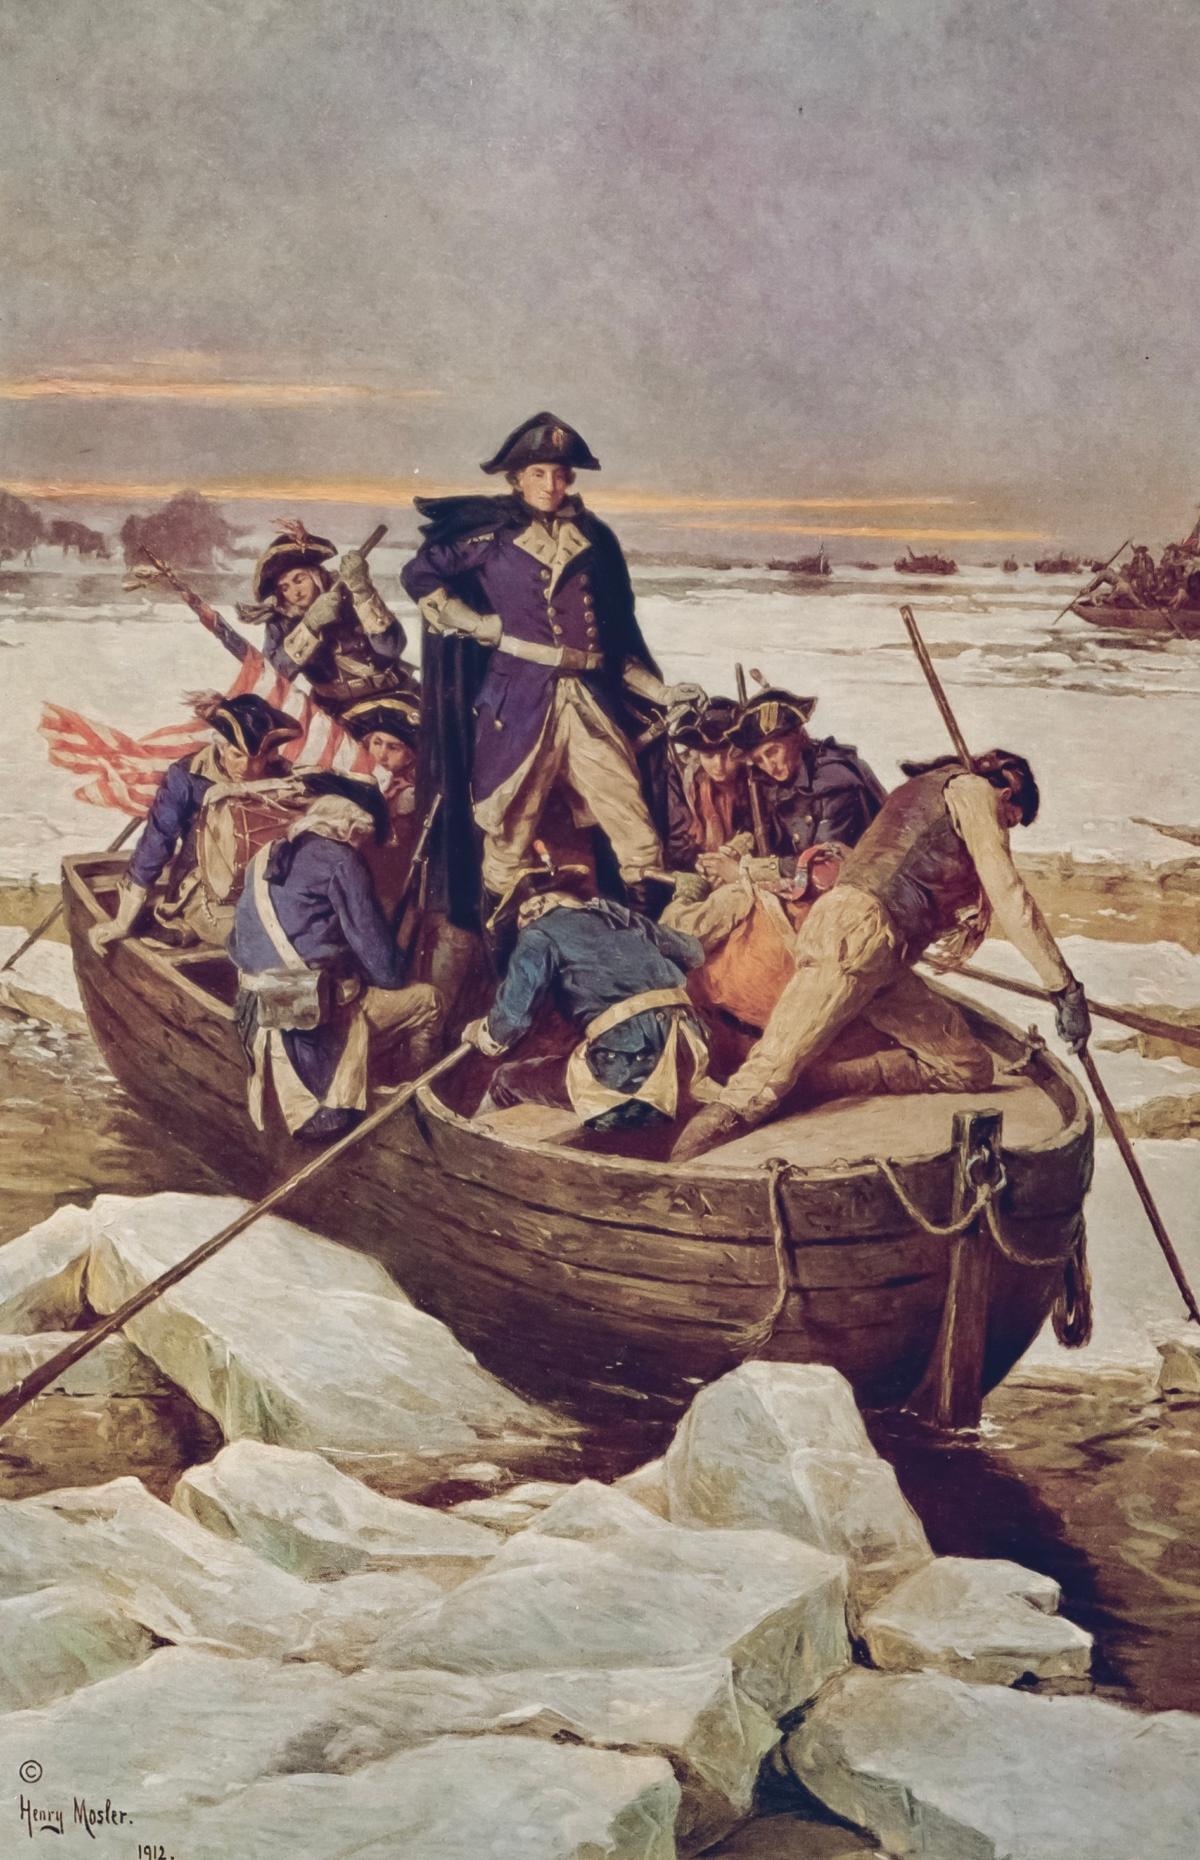 Print of “George Washington Crossing the Delaware River” by Emanuel Leutze, circa 1912–1913. Library of Congress. (Public Domain)